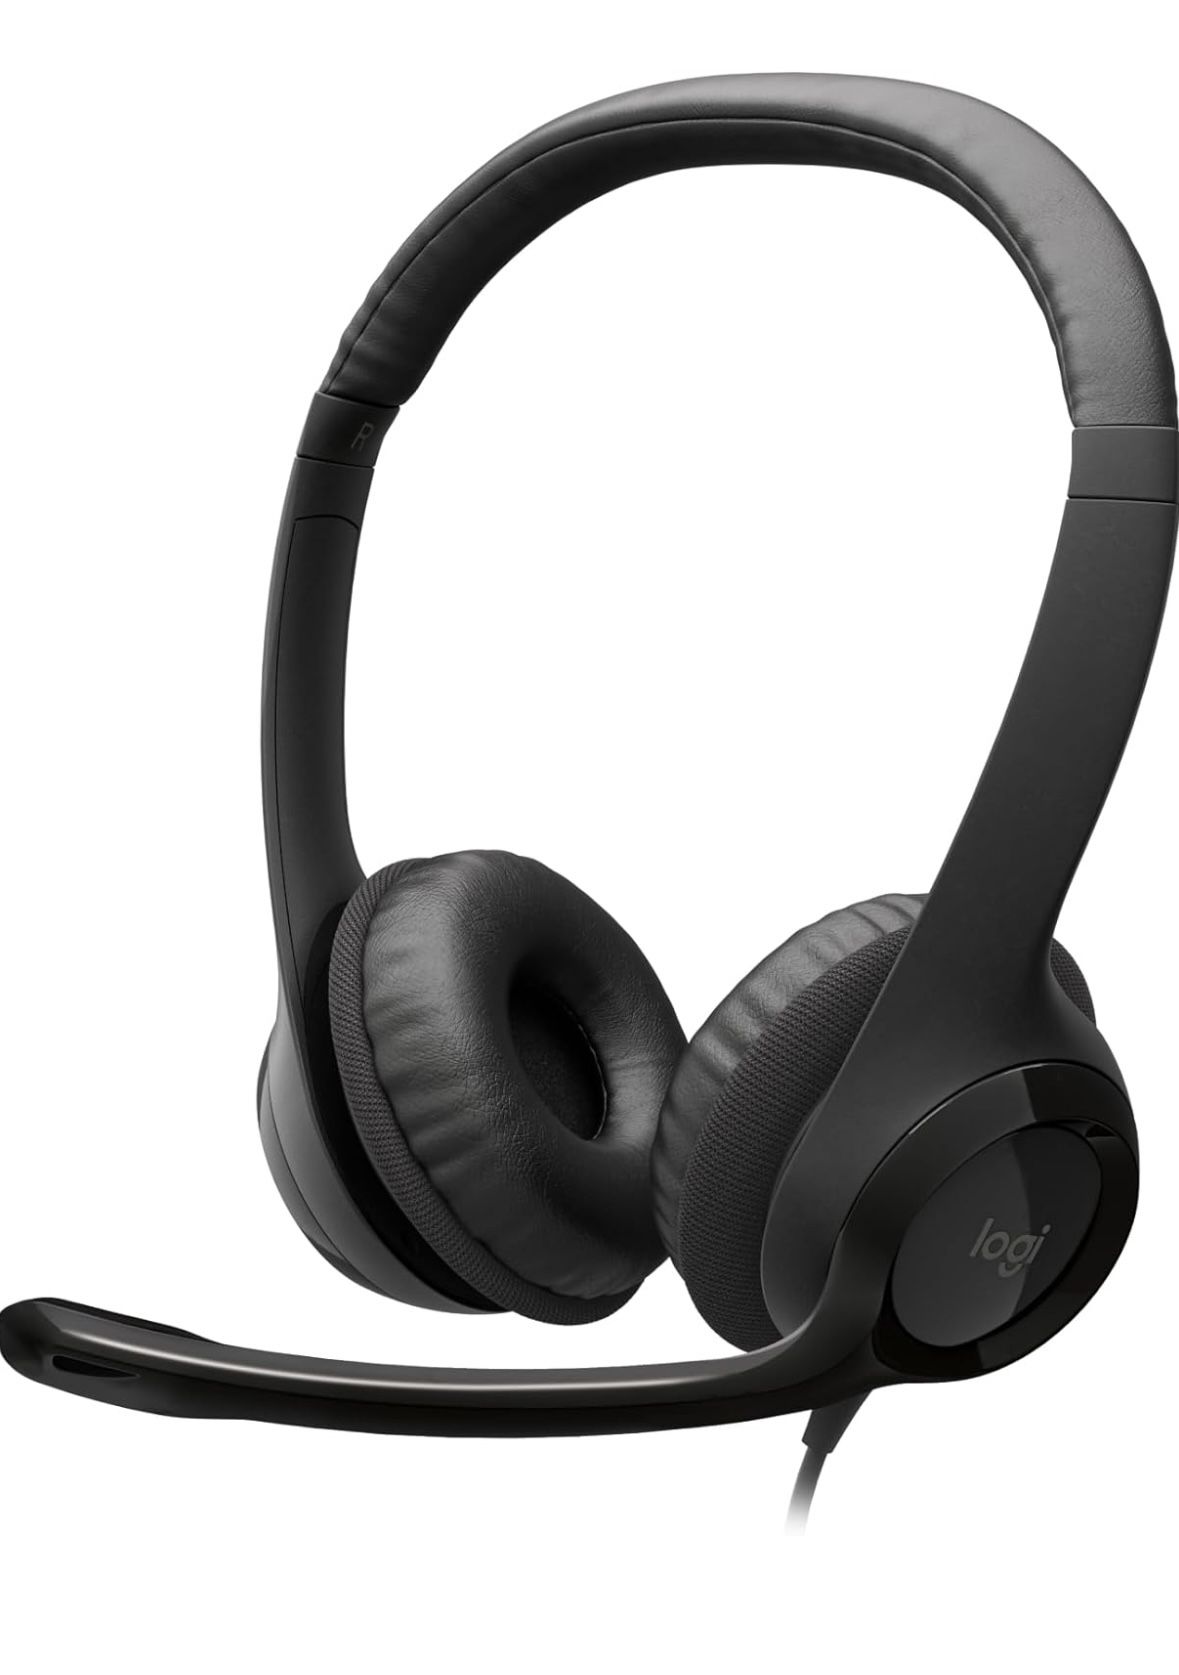 Logitech H390 Wired Headset, Stereo Headphones with Noise-Cancelling Microphone, USB, In-Line Controls, PC/Mac/Laptop - Black